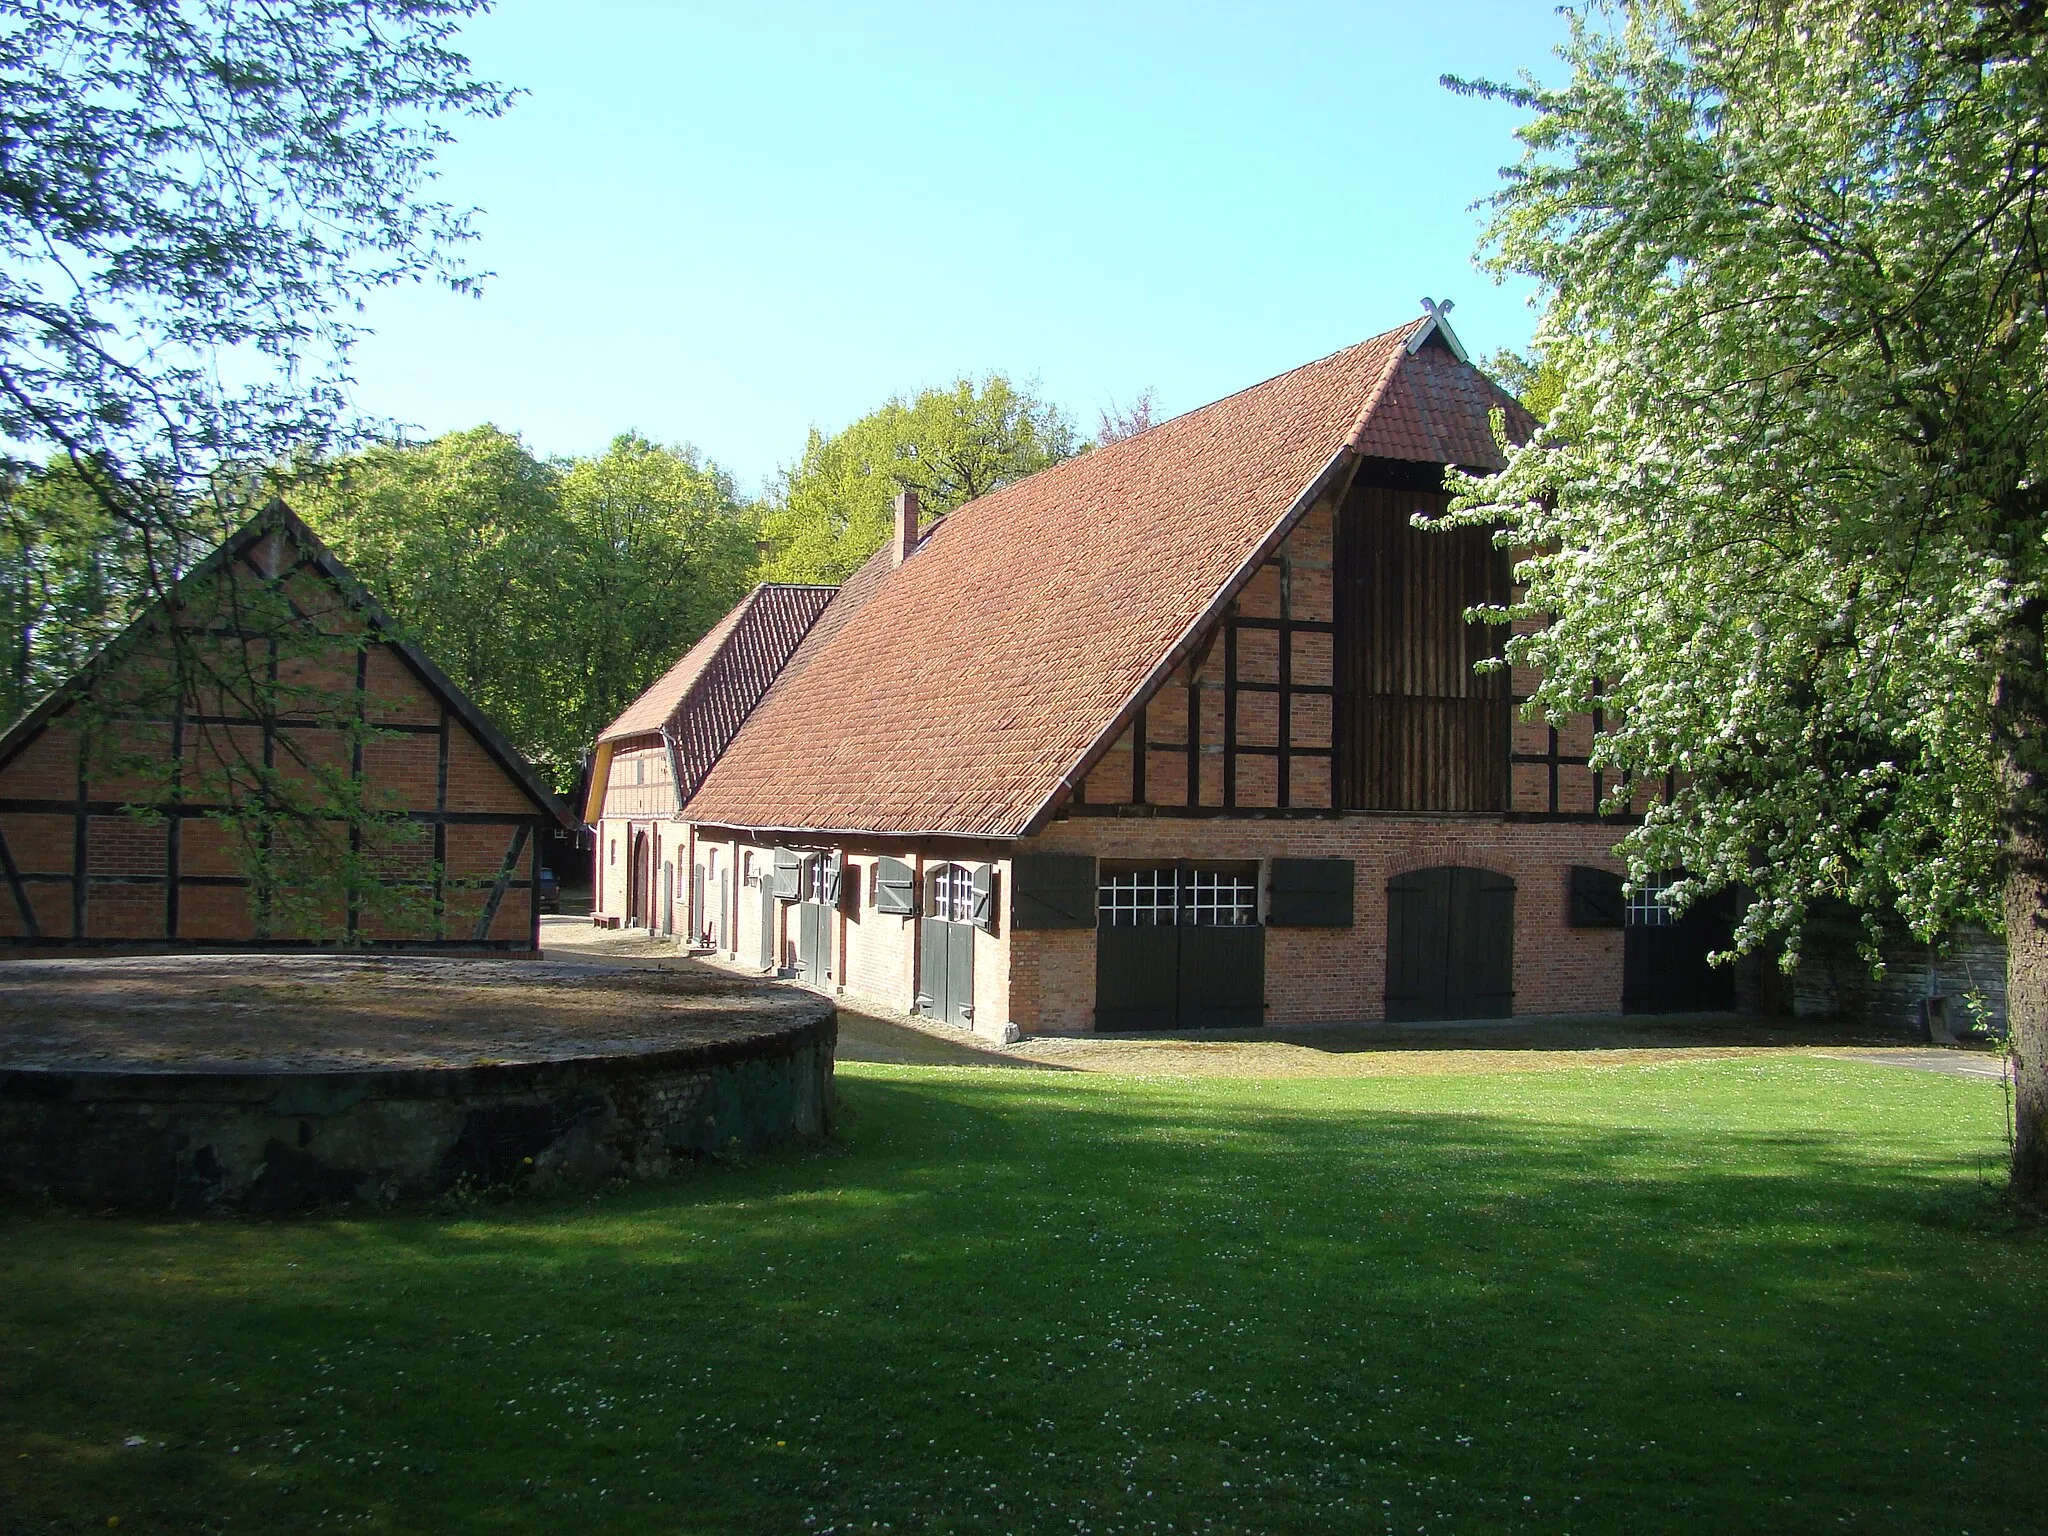 Photo showing: The Gehrshof, an old farm in Dohnsen, Lower Saxony, Germany.